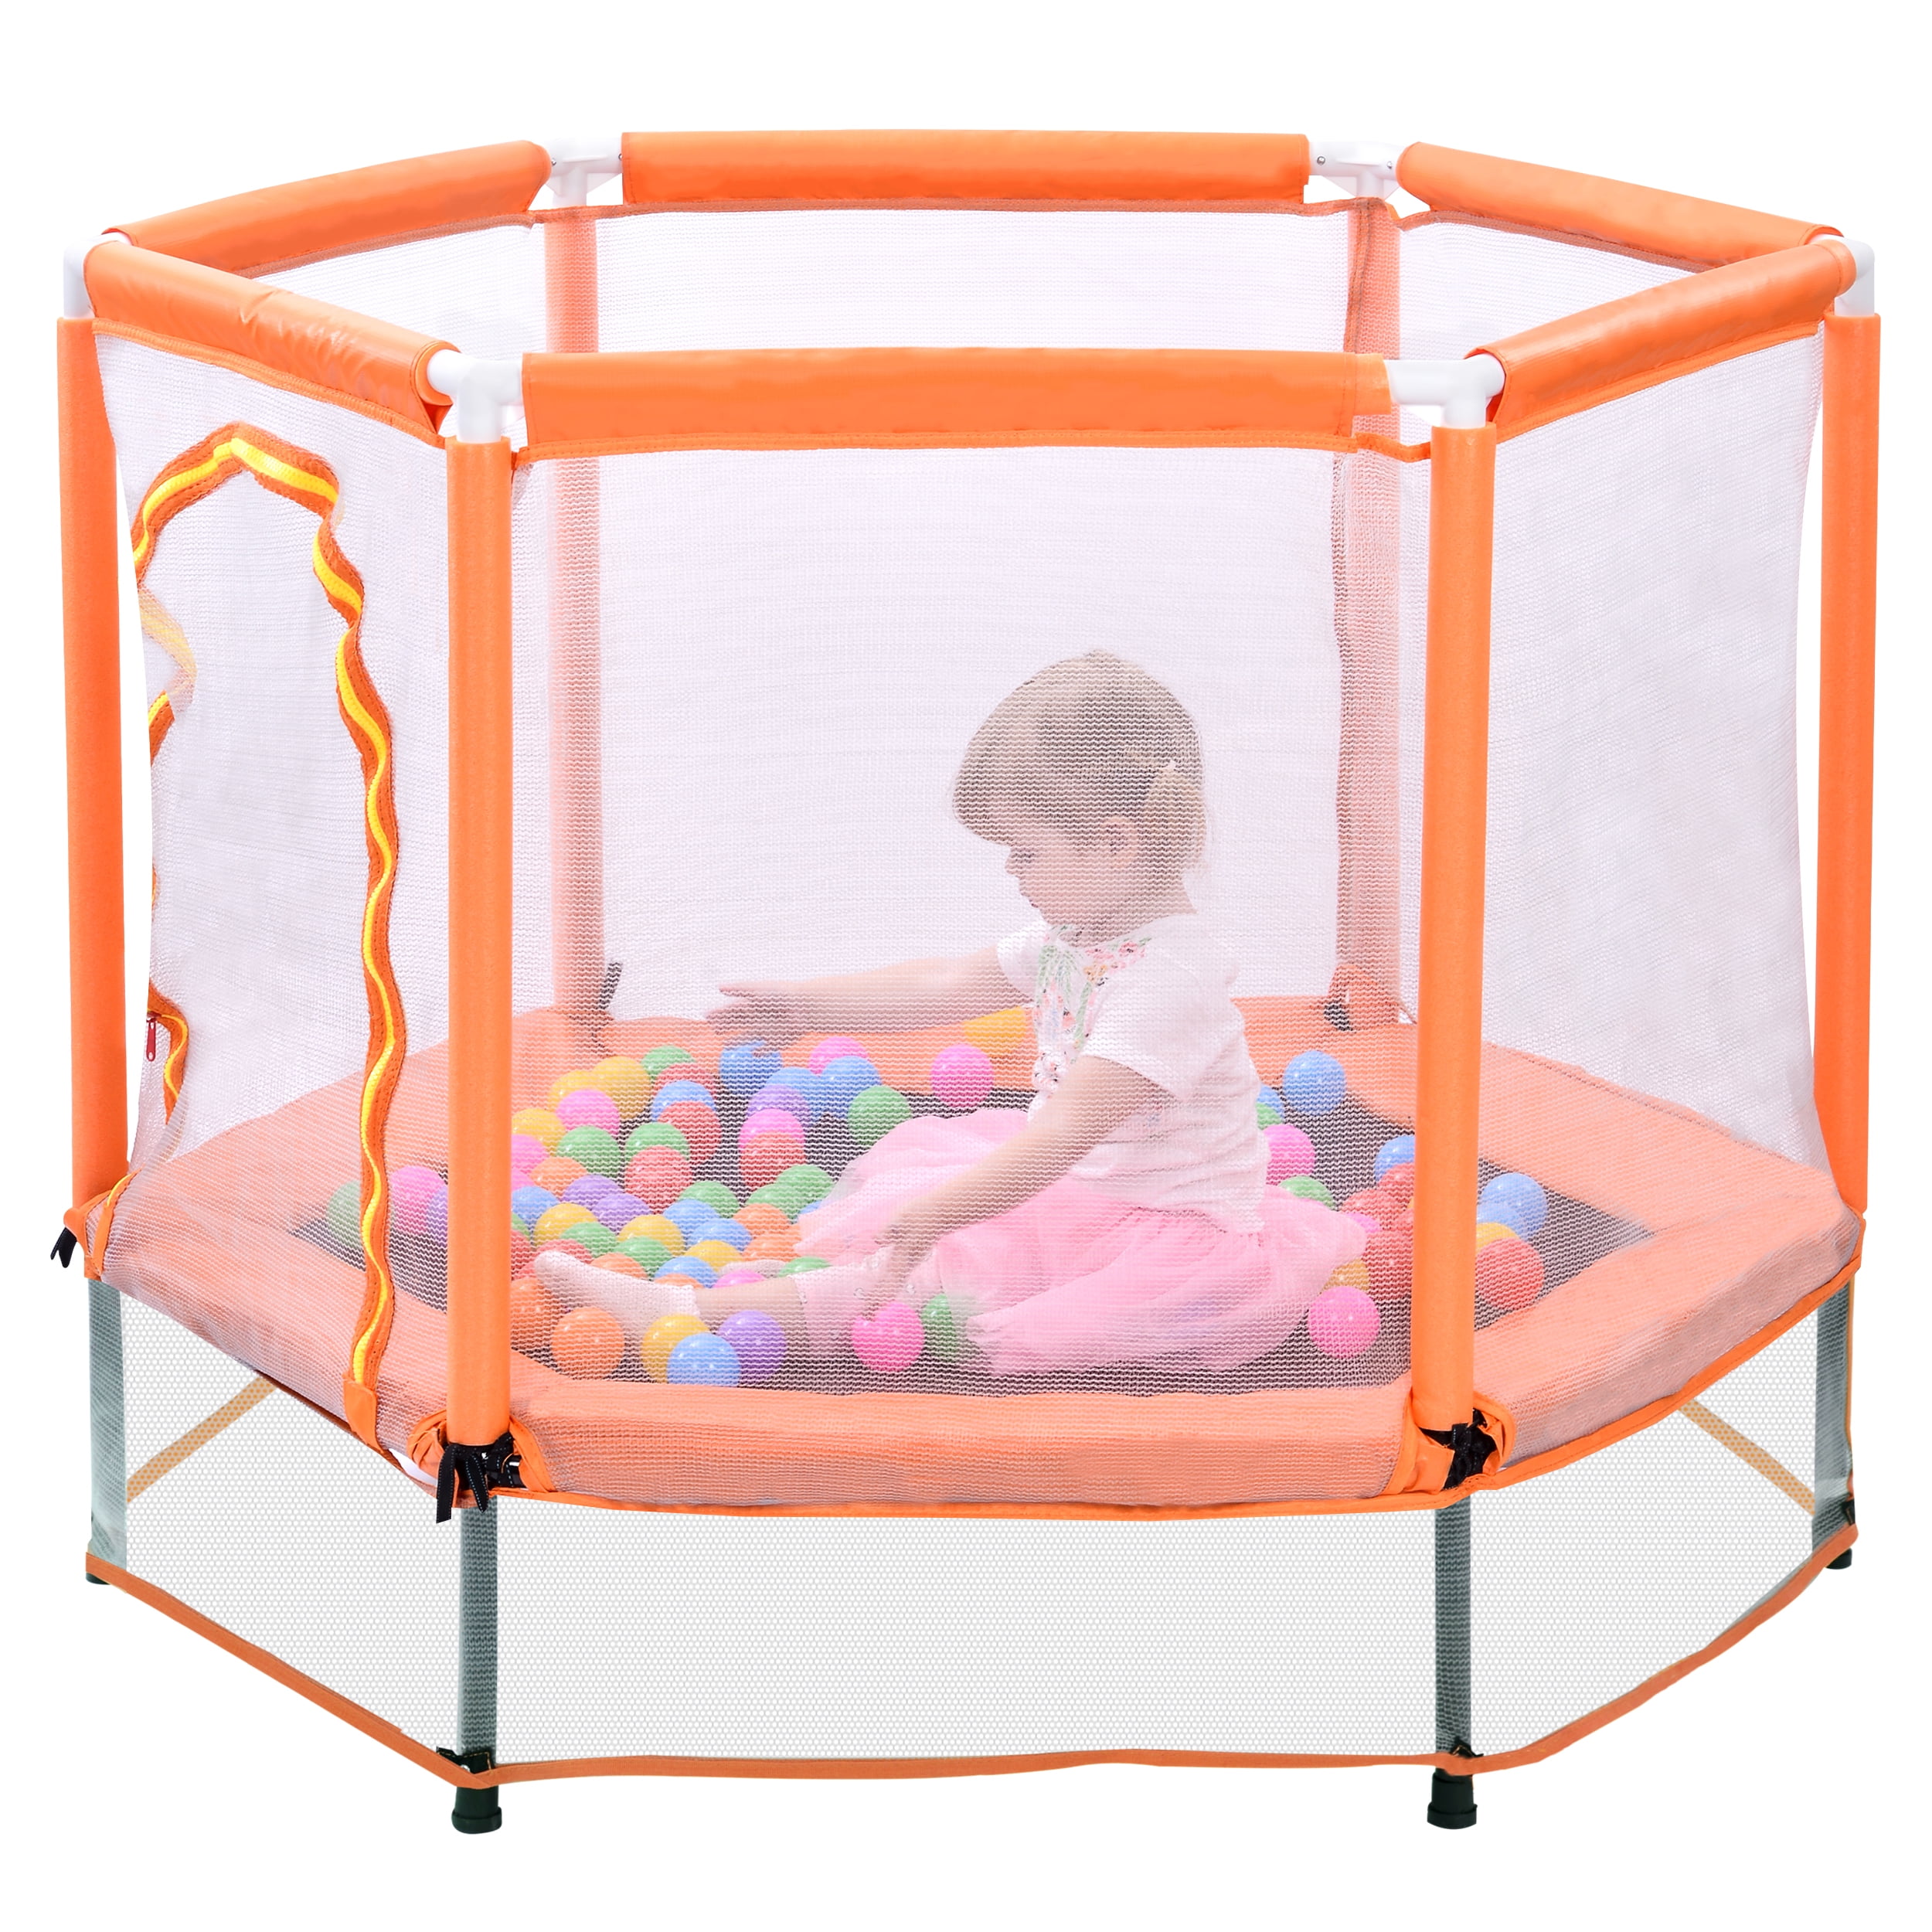 Kids Trampoline with Enclosure Net Durable Fitness Trampoline Indoor Outdoor Trampoline for Boys Grils Children Toddler 1.4m/55inch Colorful Trampoline with Safety Net,Seaballs,Basketball Hoop 